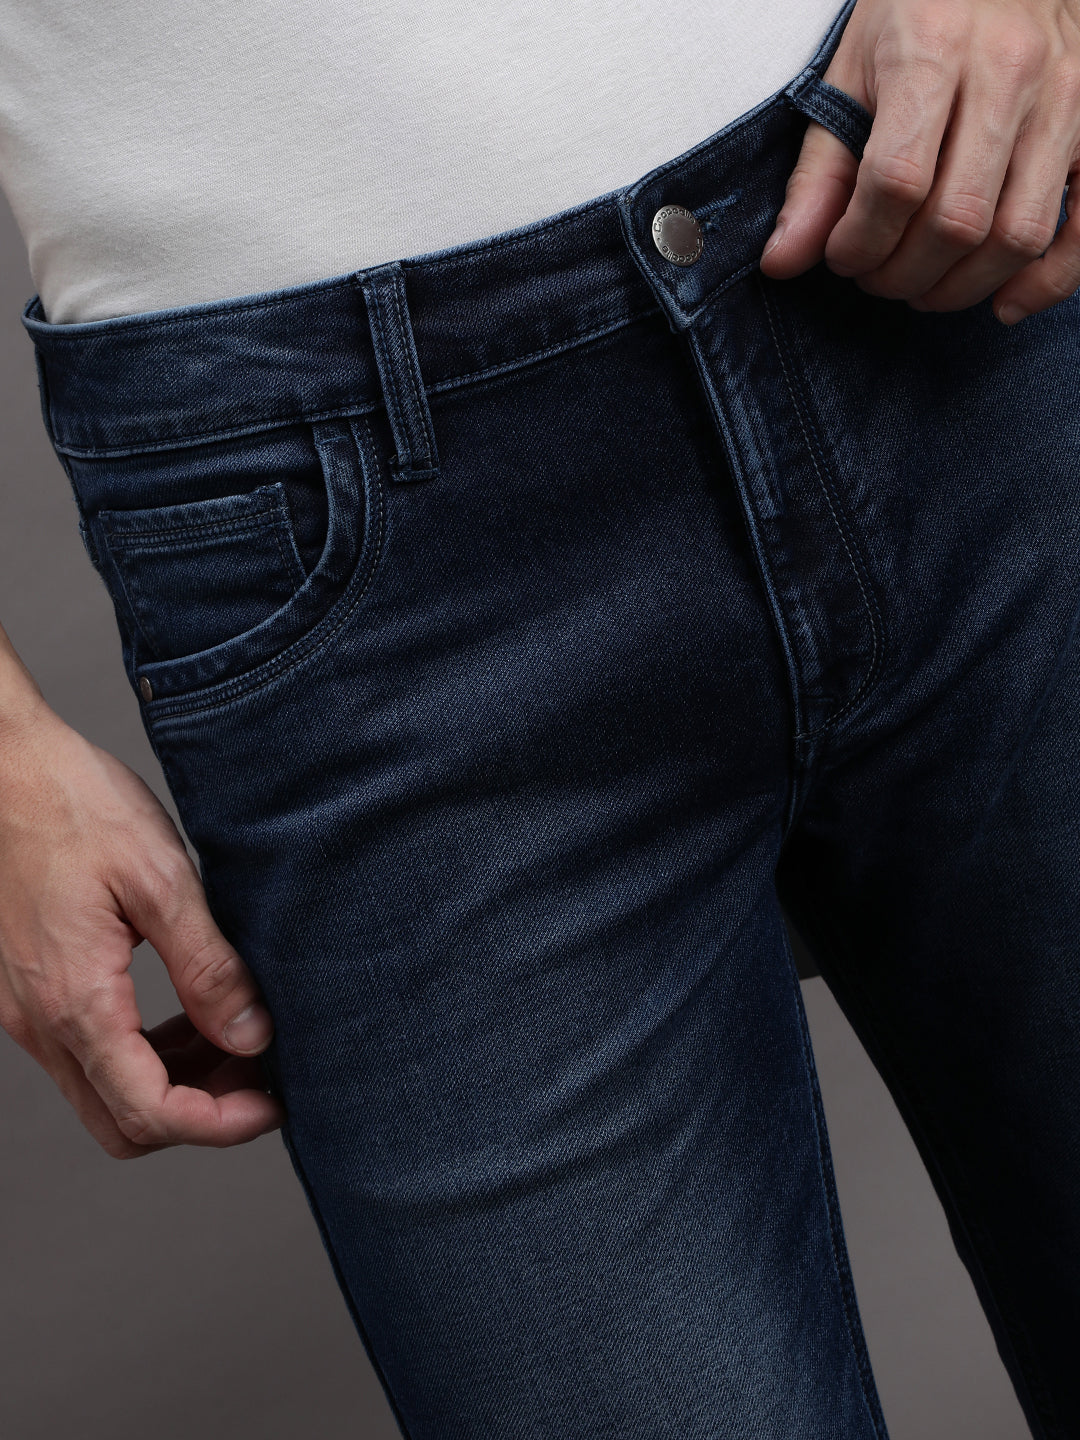 PREMIUM KNITTED DARK WASHED JEANS FOR MEN